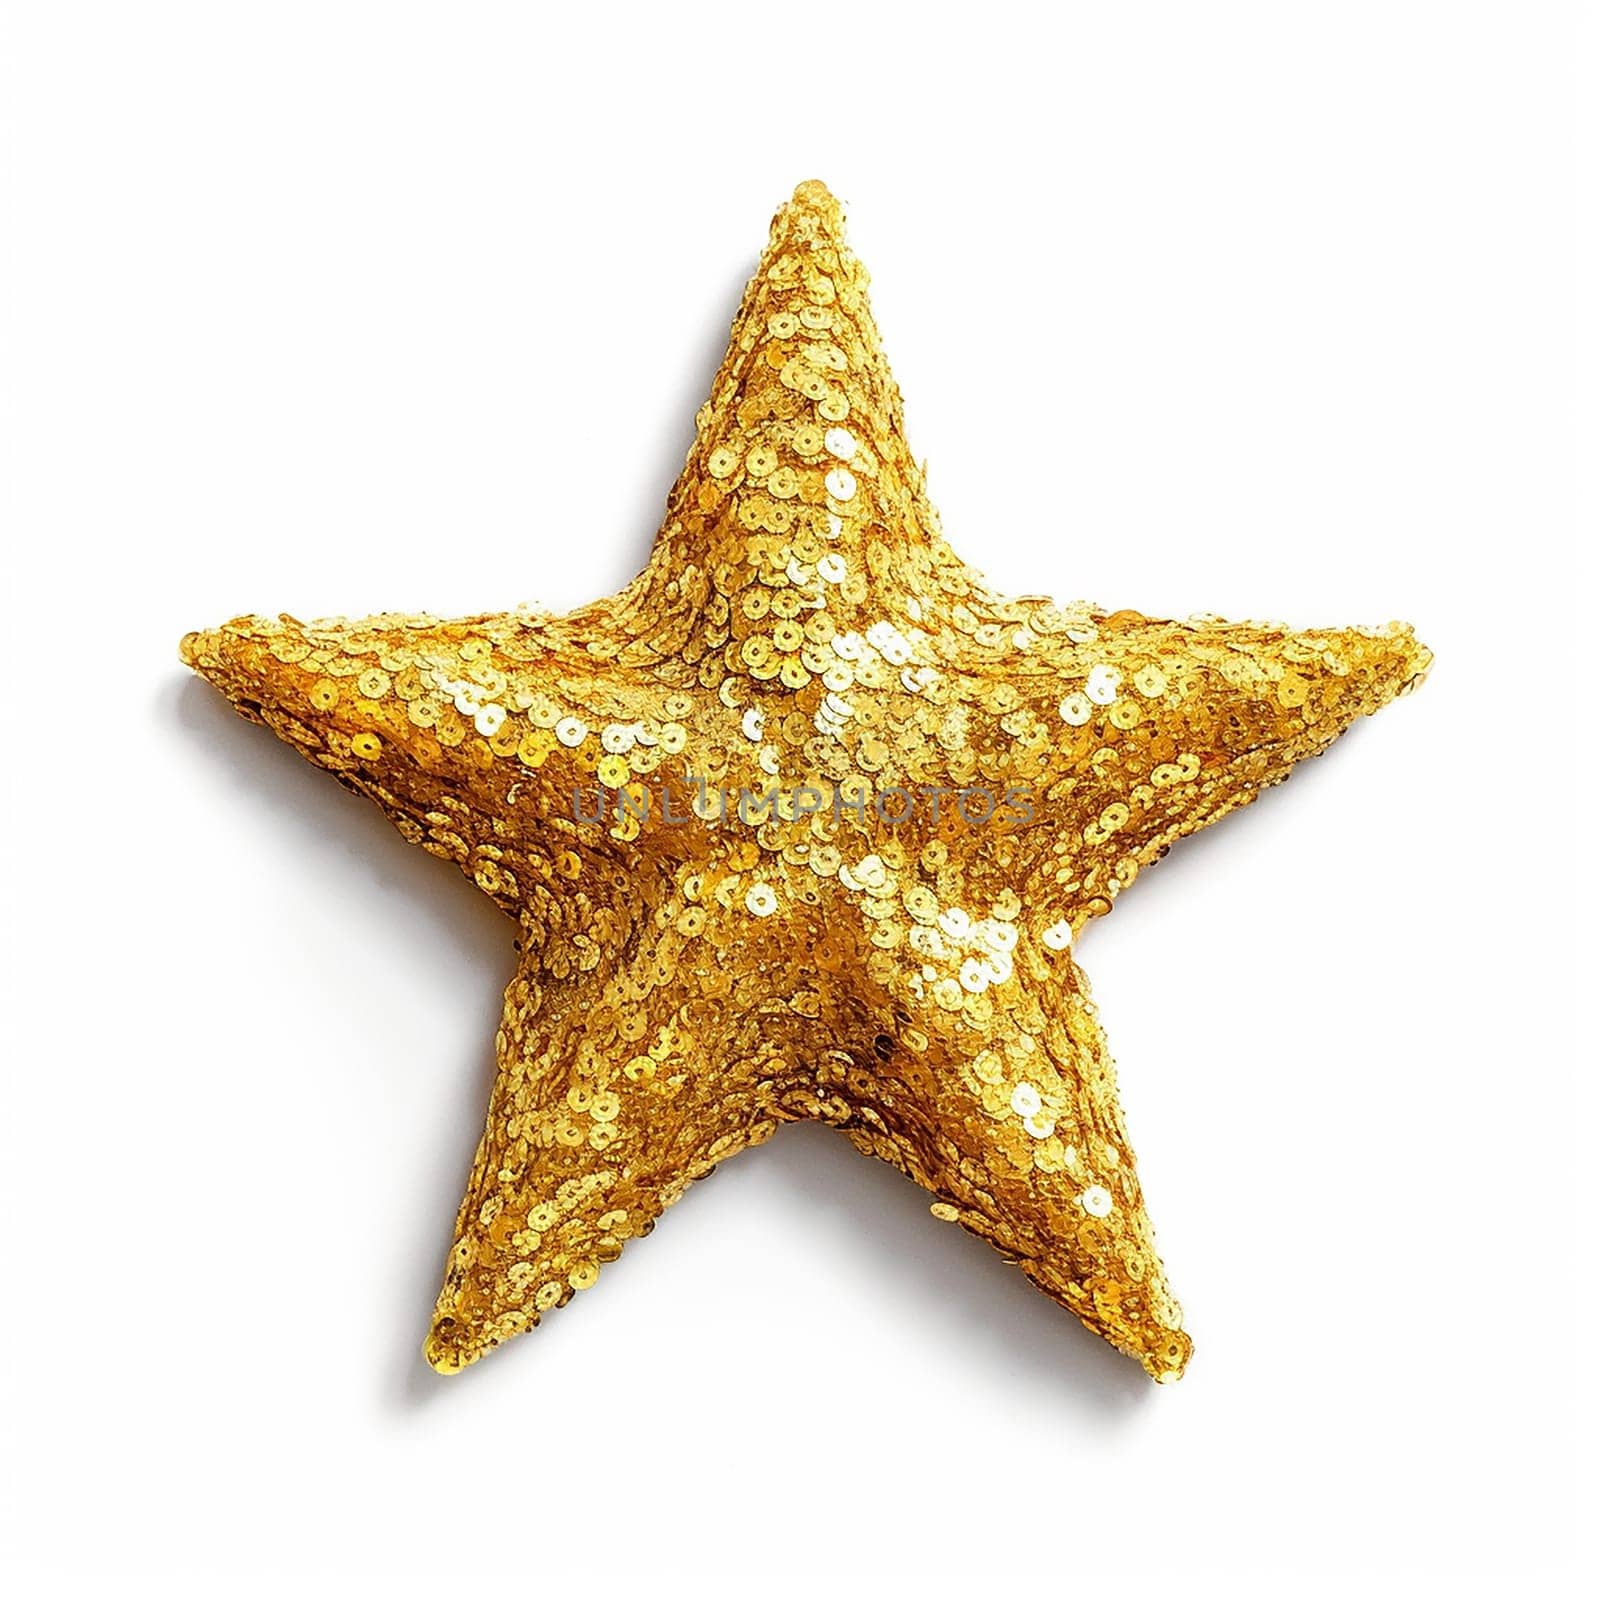 Golden sequined star shaped object isolated on white background. by Hype2art